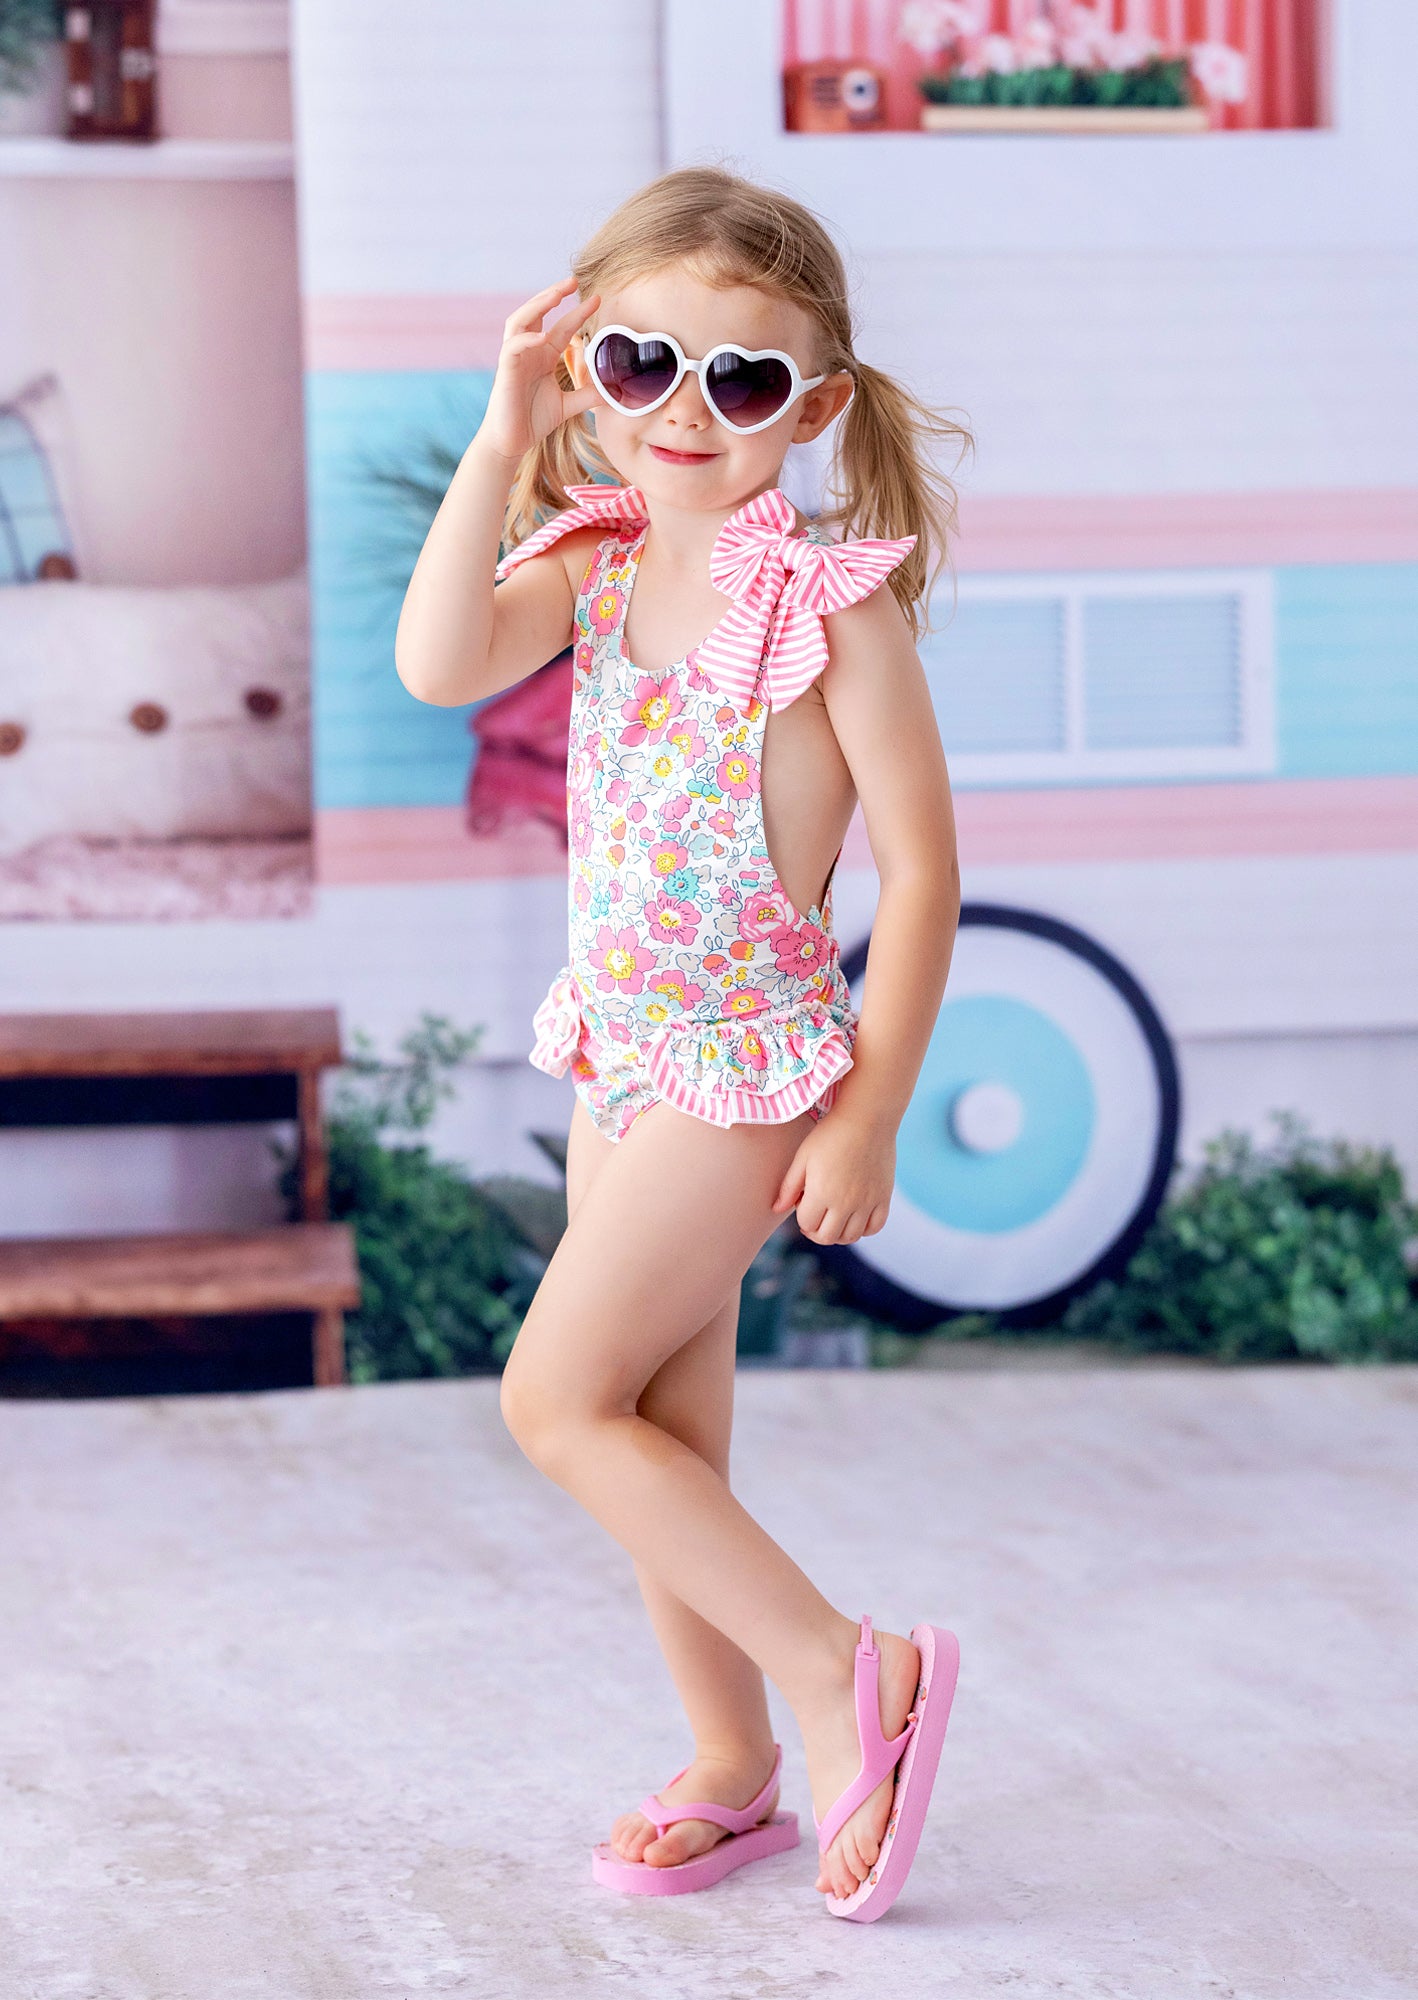 Pink Posies Girls Swimsuit with Bows -  3T